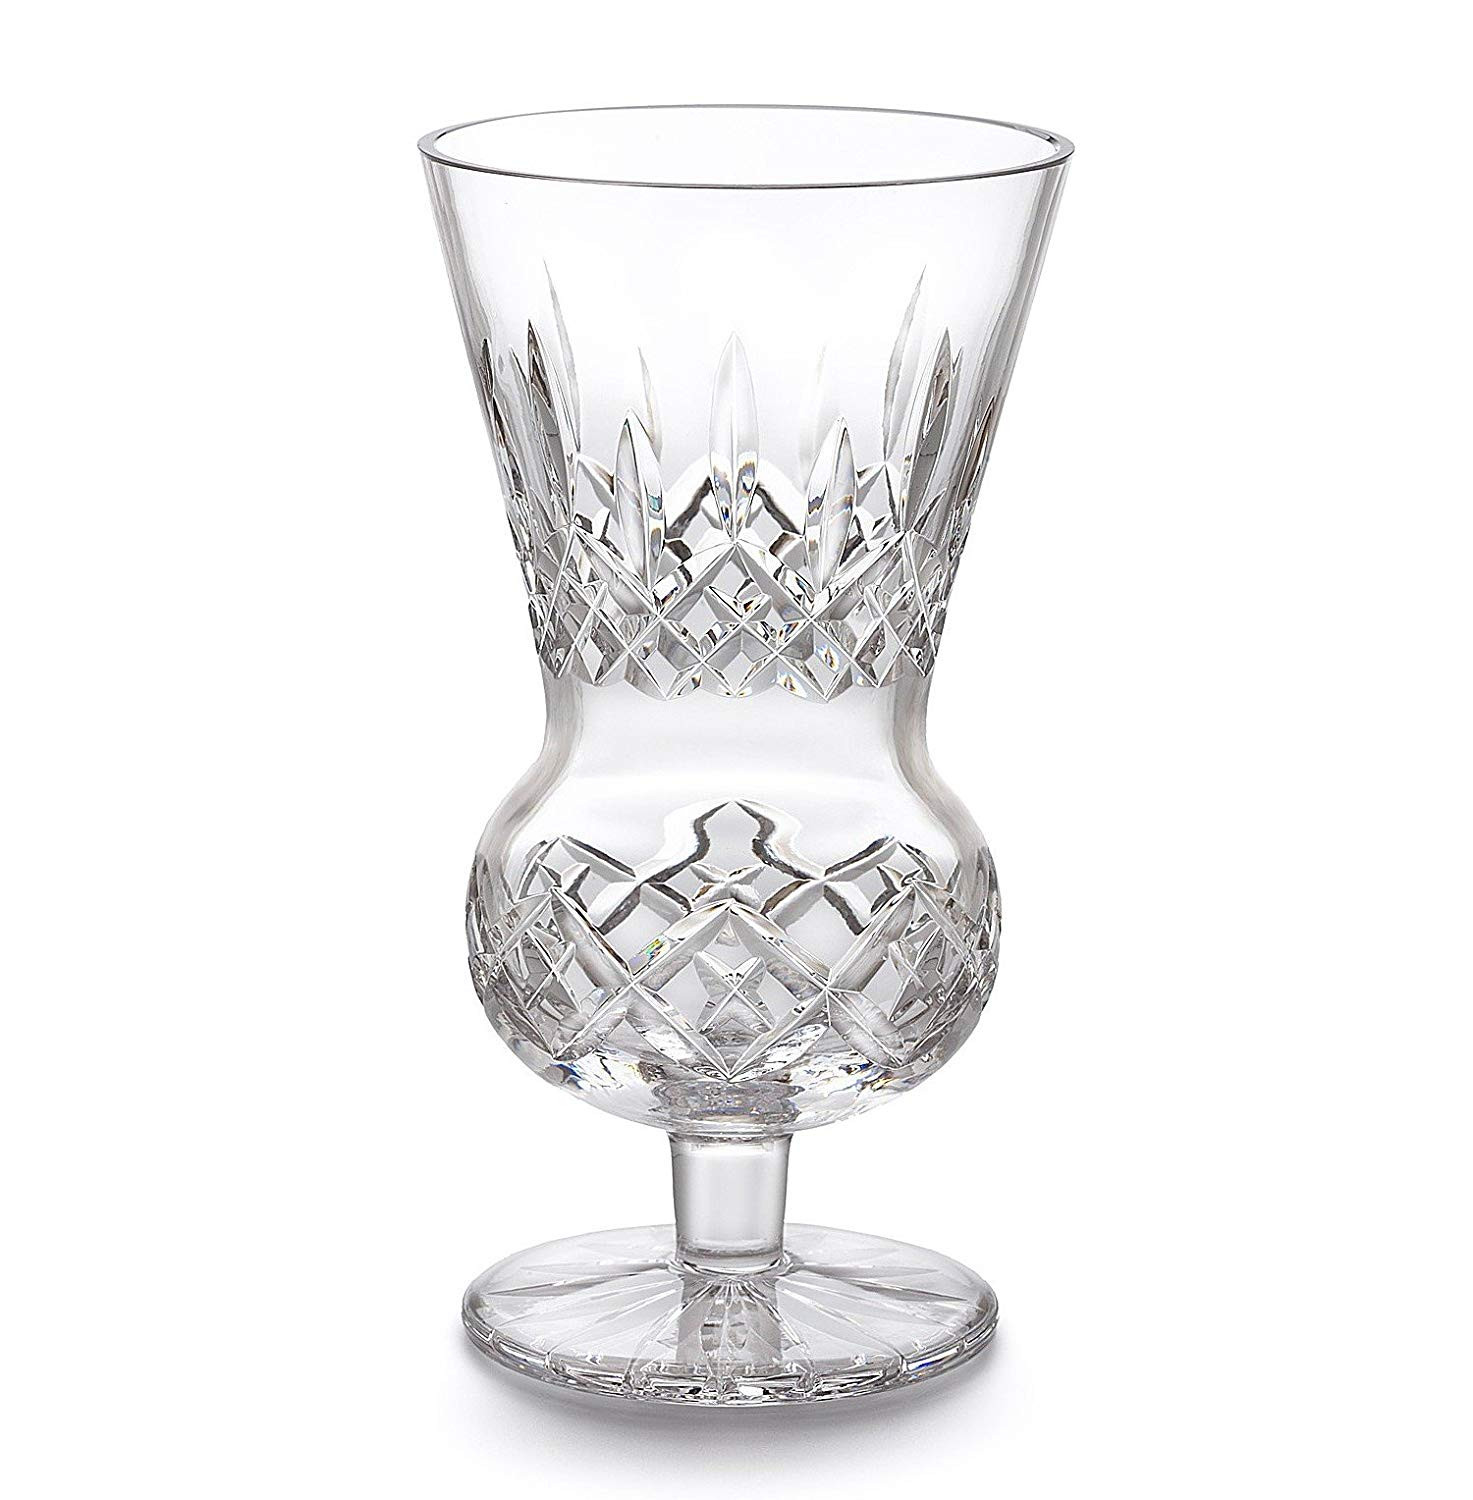 Waterford Lismore Vase 8 Of Amazon Com Waterford Crystal Lismore Thistle Vase Home Kitchen within 71u39 Vtdys Sl1500